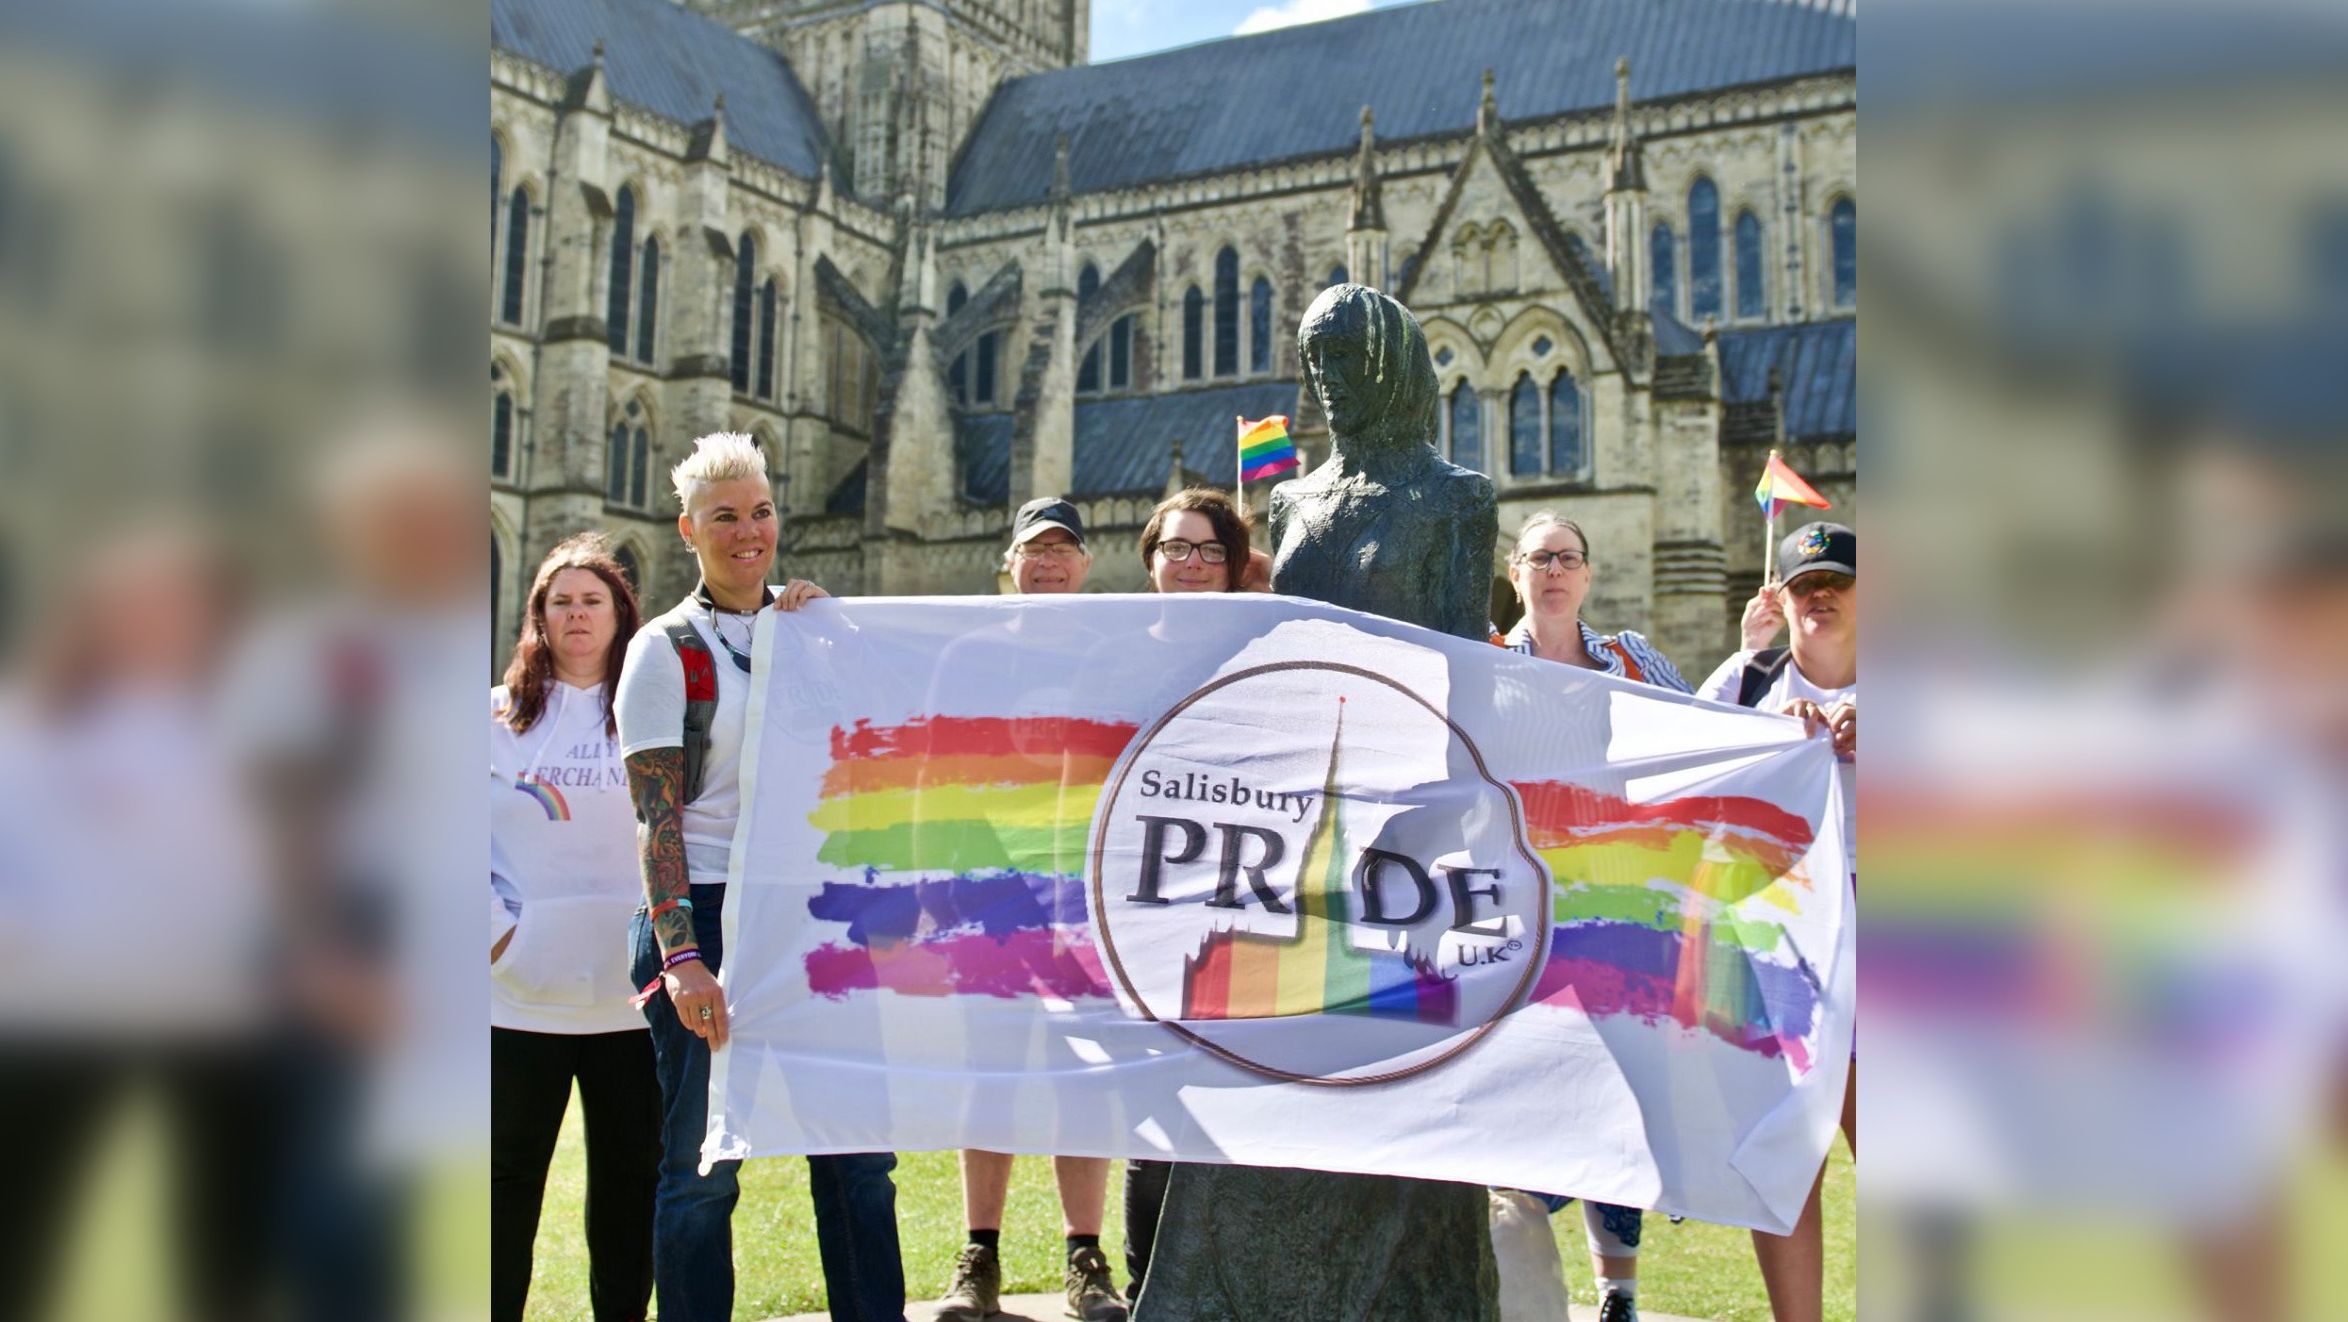 Salisbury pride is back with the event taking place on September 4th at